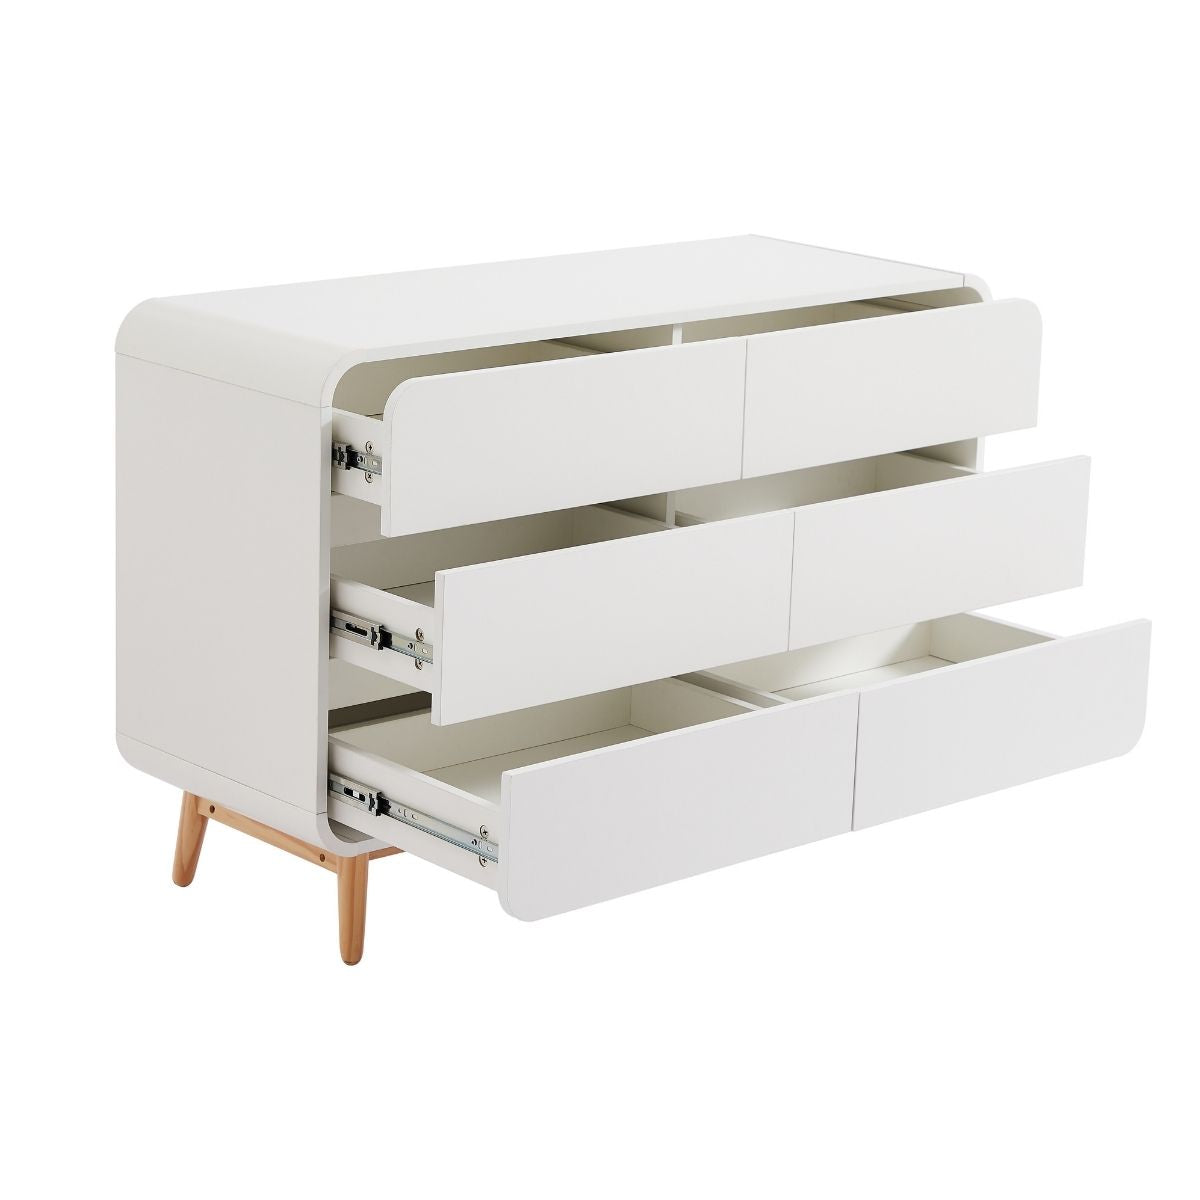 Merlin Modern Retro Chest of Drawers - White and Oak